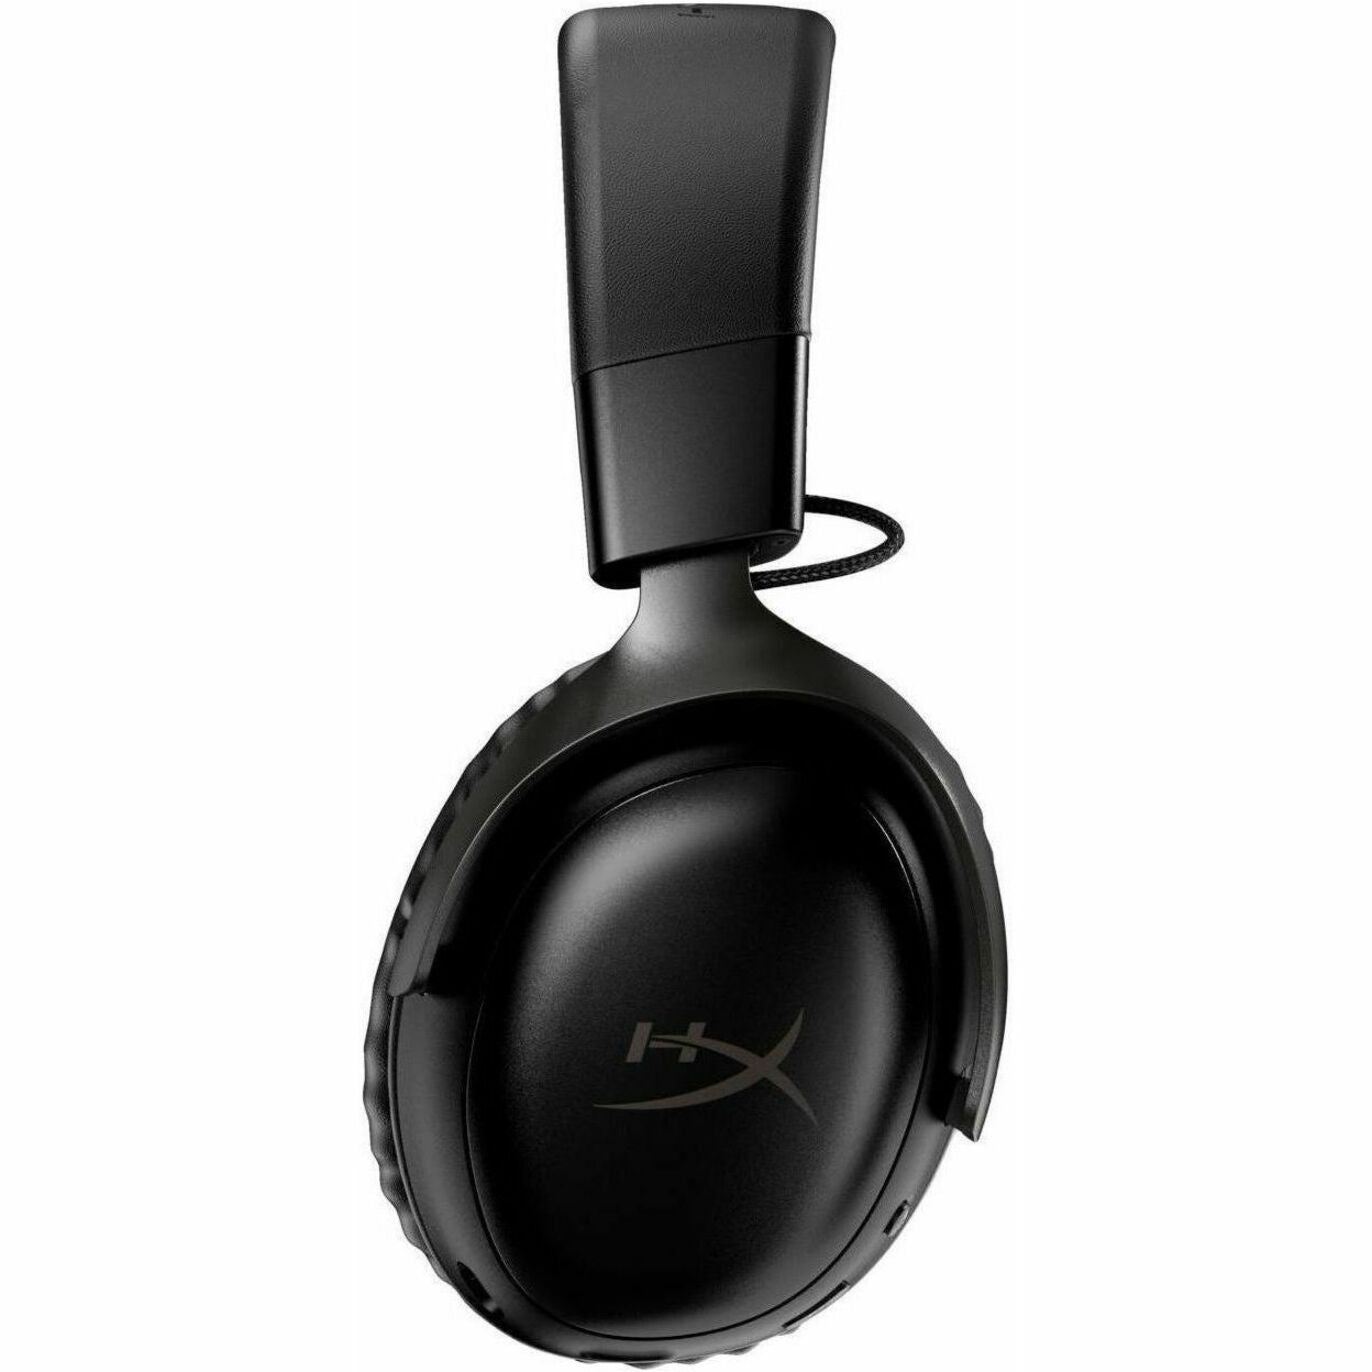 HyperX 77Z45AA Cloud III Wireless Gaming Headset, 7.1 Surround Sound, Crystal Clear Microphone, Comfortable